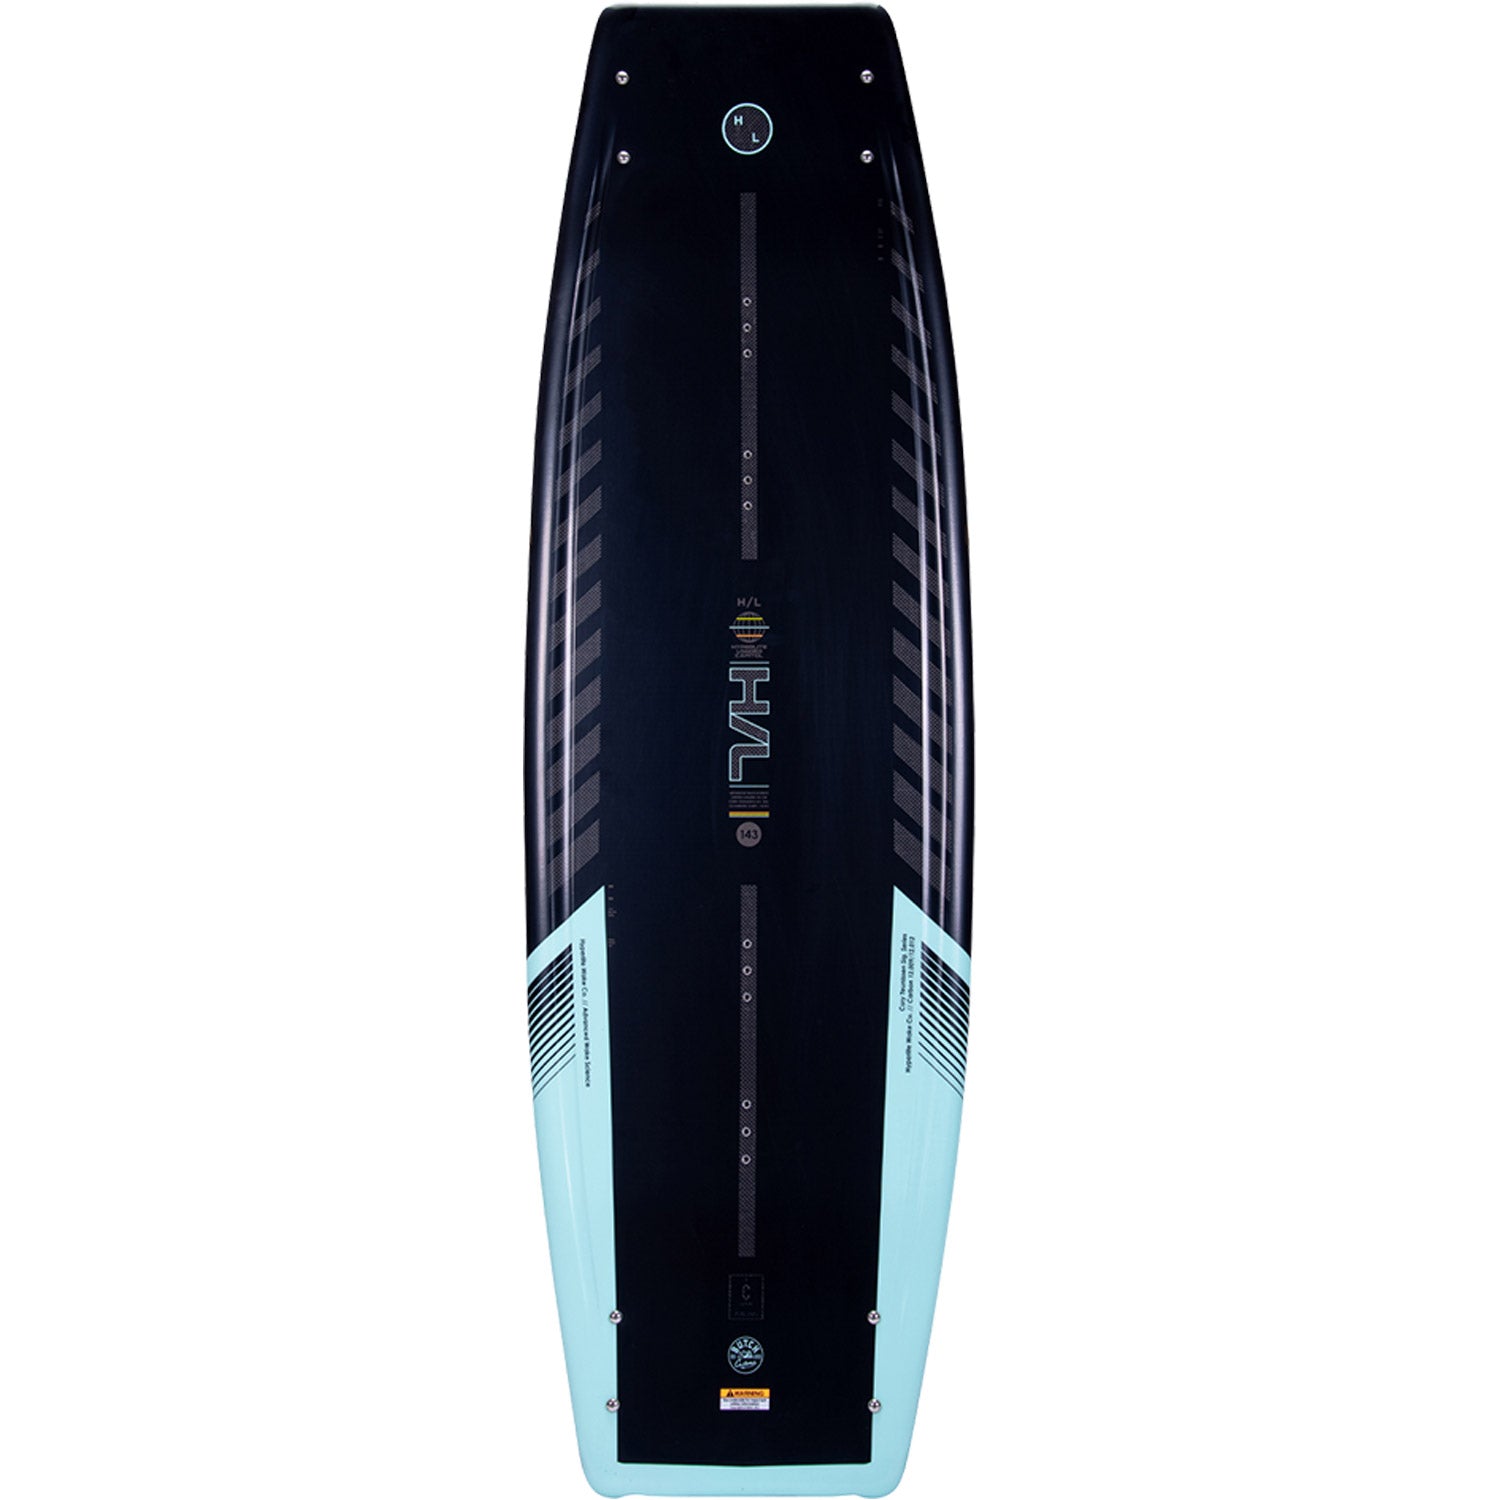 Men's Capitol Loaded Wakeboard